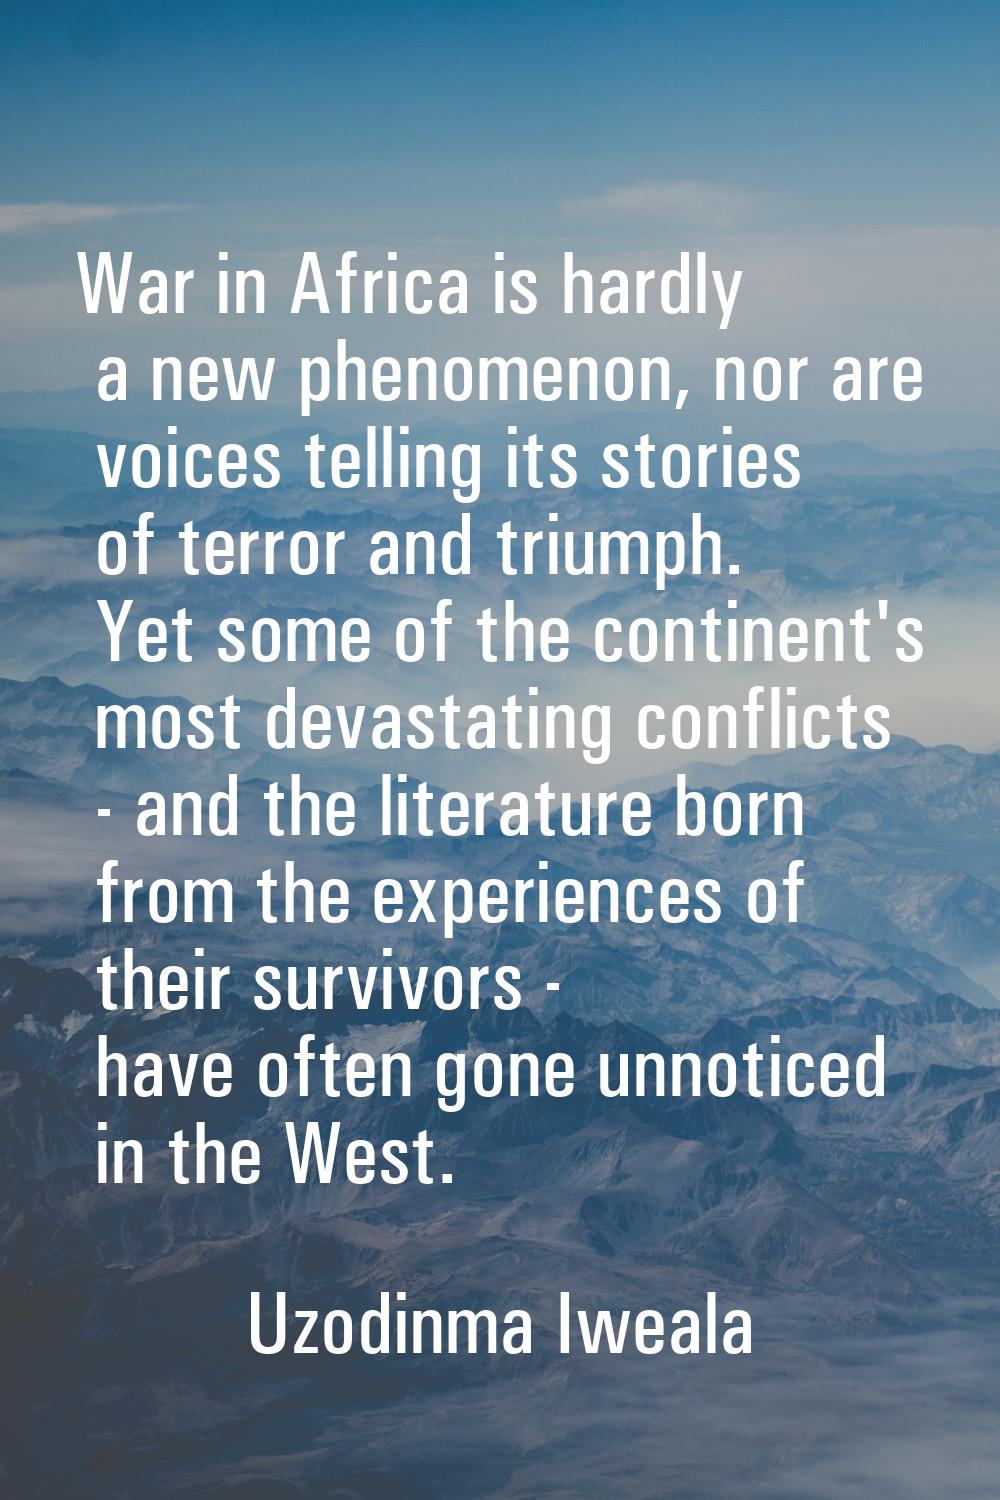 War in Africa is hardly a new phenomenon, nor are voices telling its stories of terror and triumph.